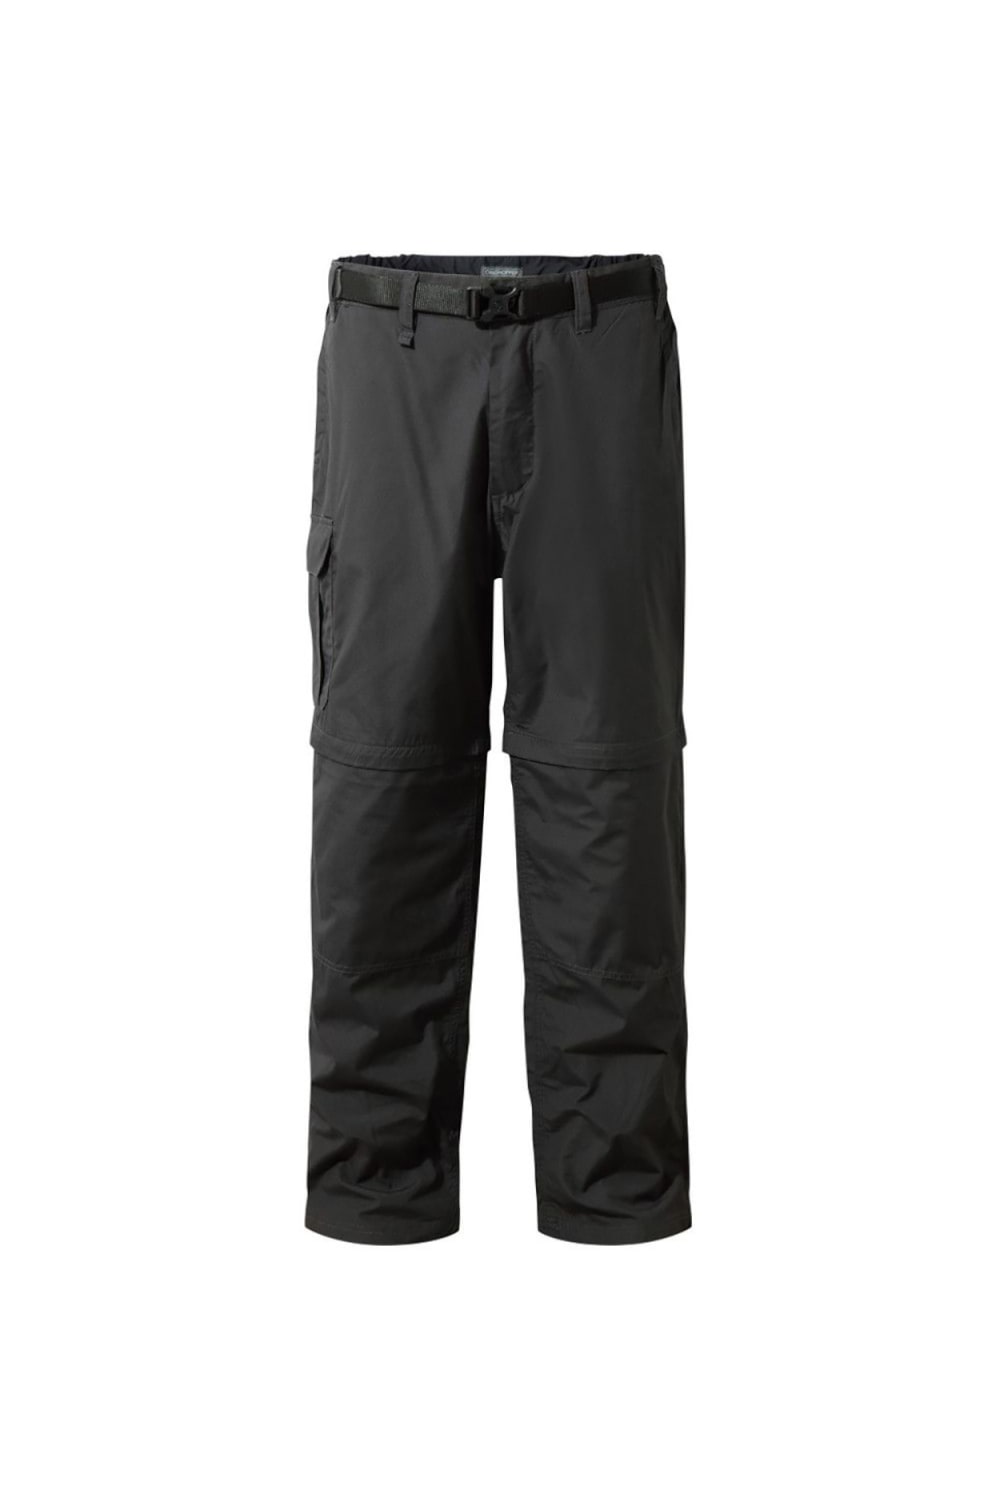 Craghoppers Outdoor Classic Mens Classic Kiwi Stain Resistant Trousers/Pants (Black Pepper)